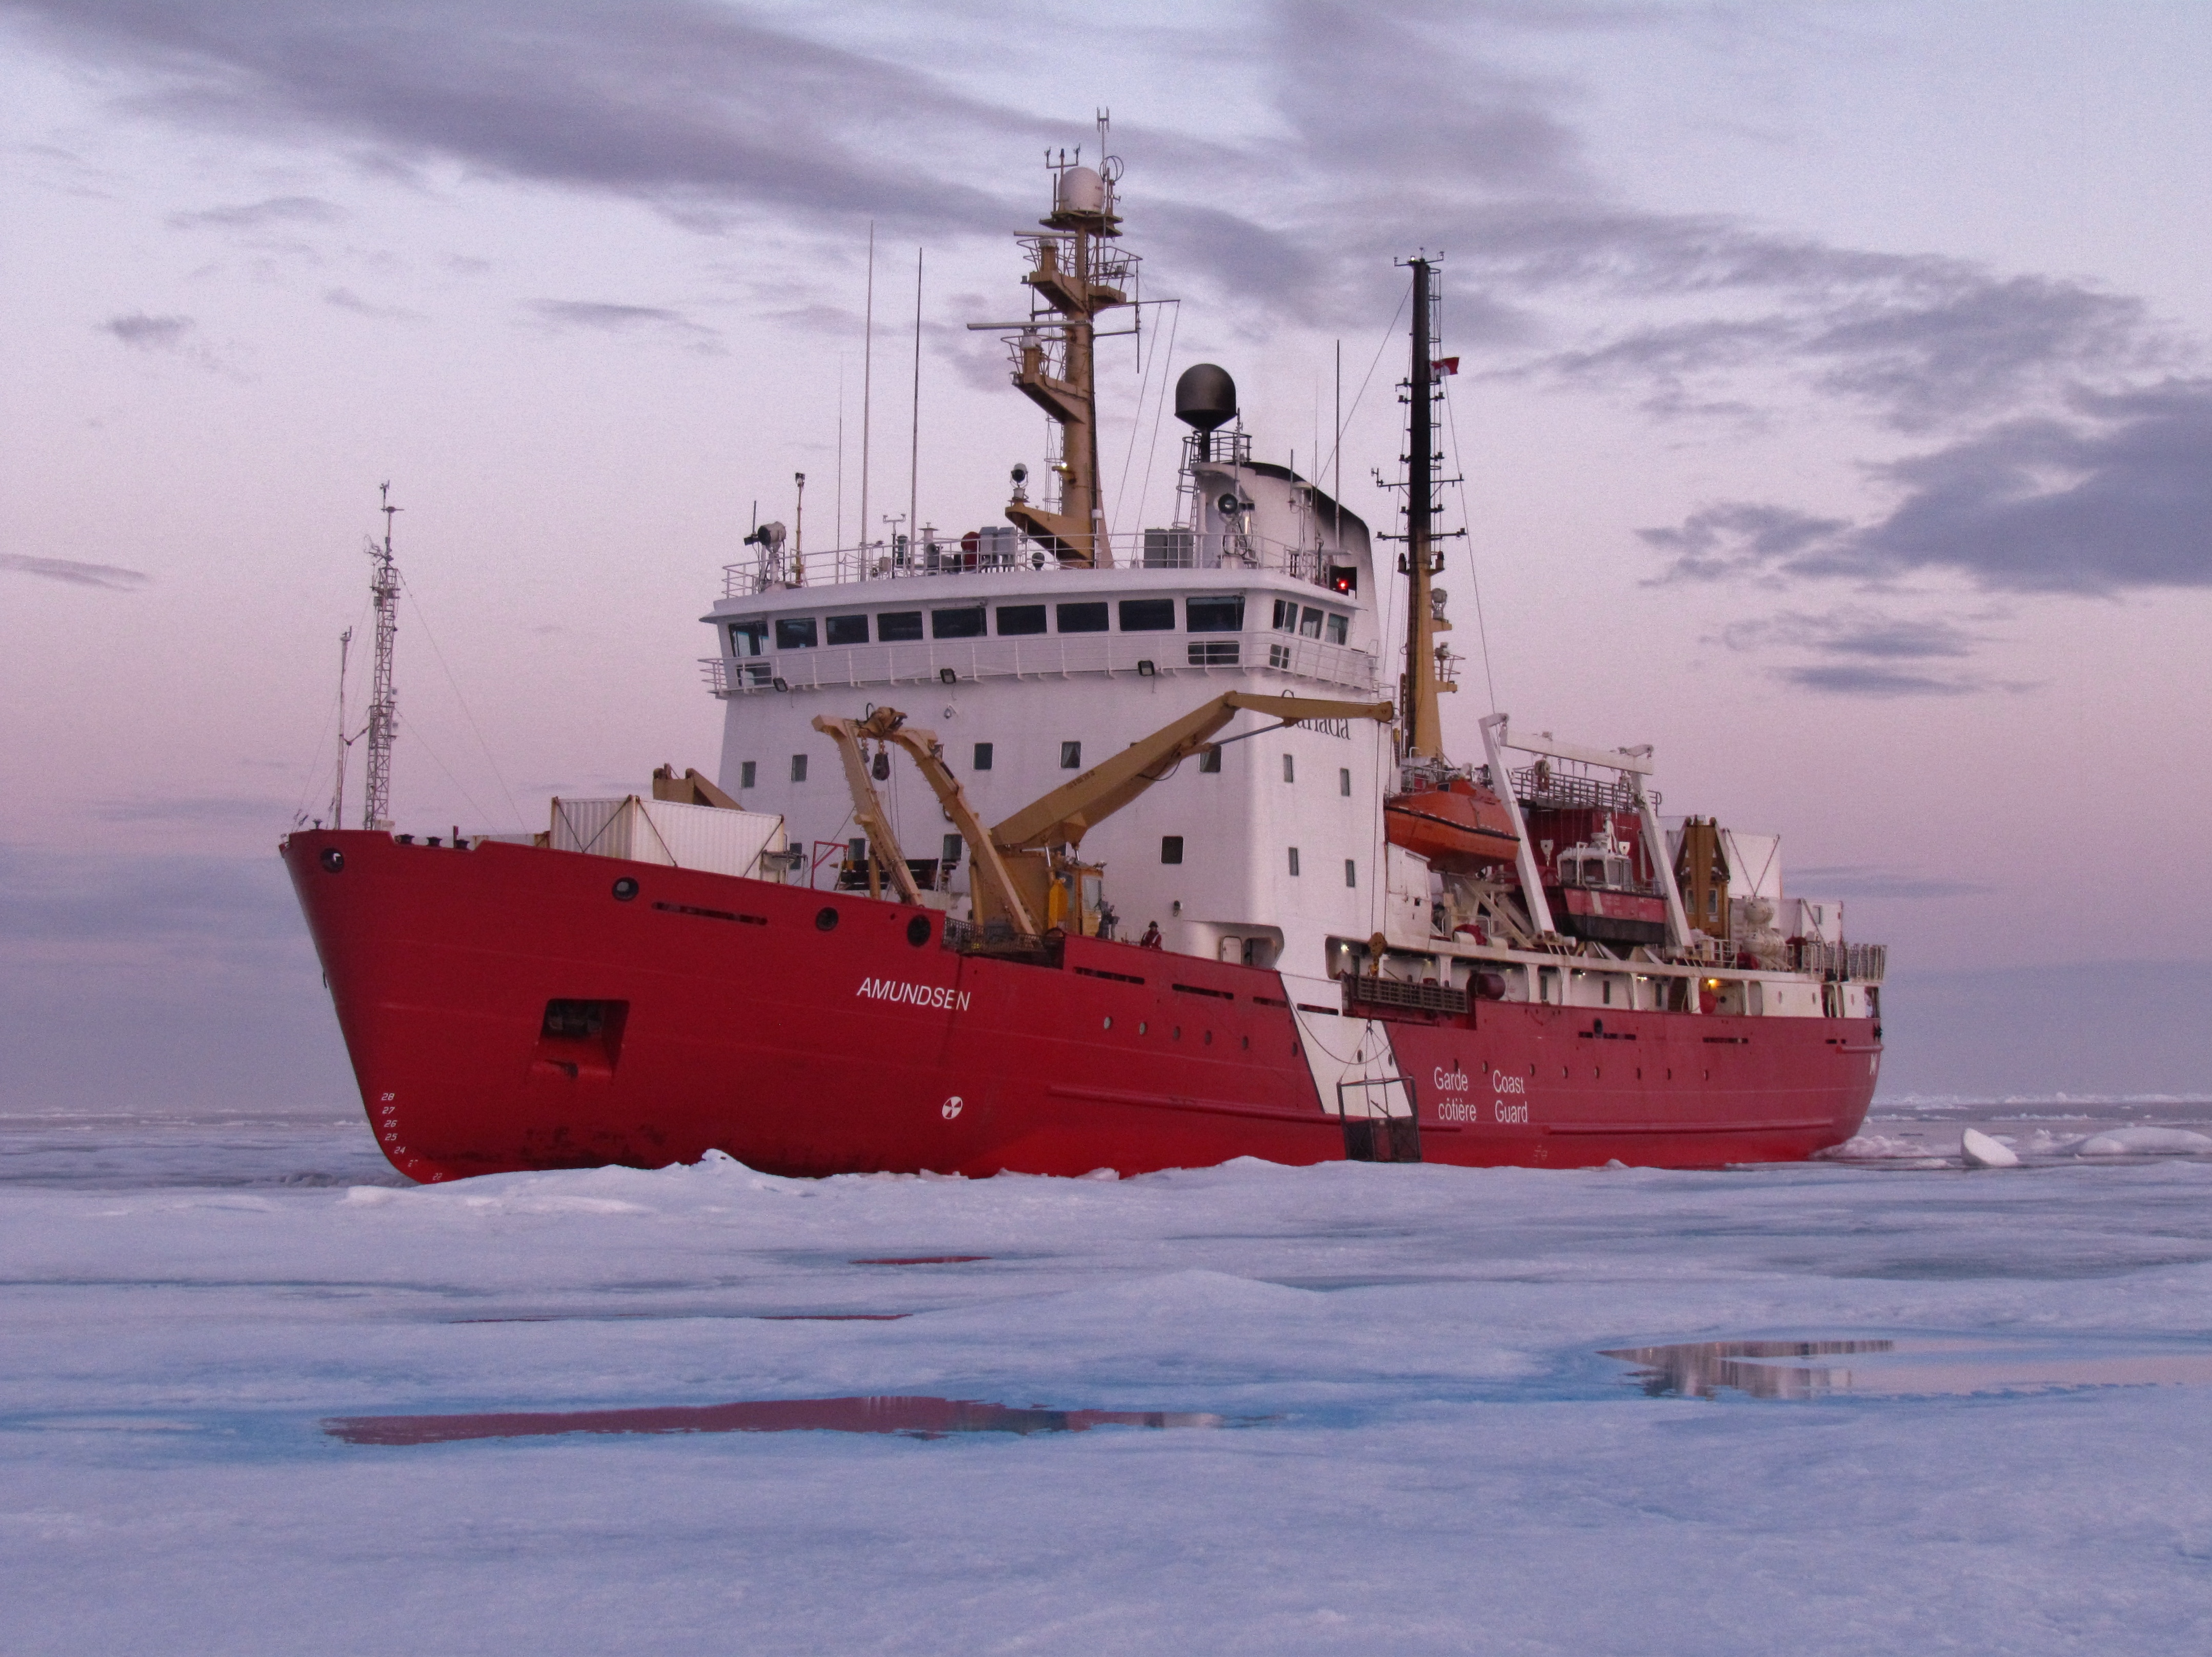 The Canadian icebreaker Amundsen that was called off its scientific duty in 2017 to assist with search and rescue for ships stranded in sea ice.  Credit: David Babb.